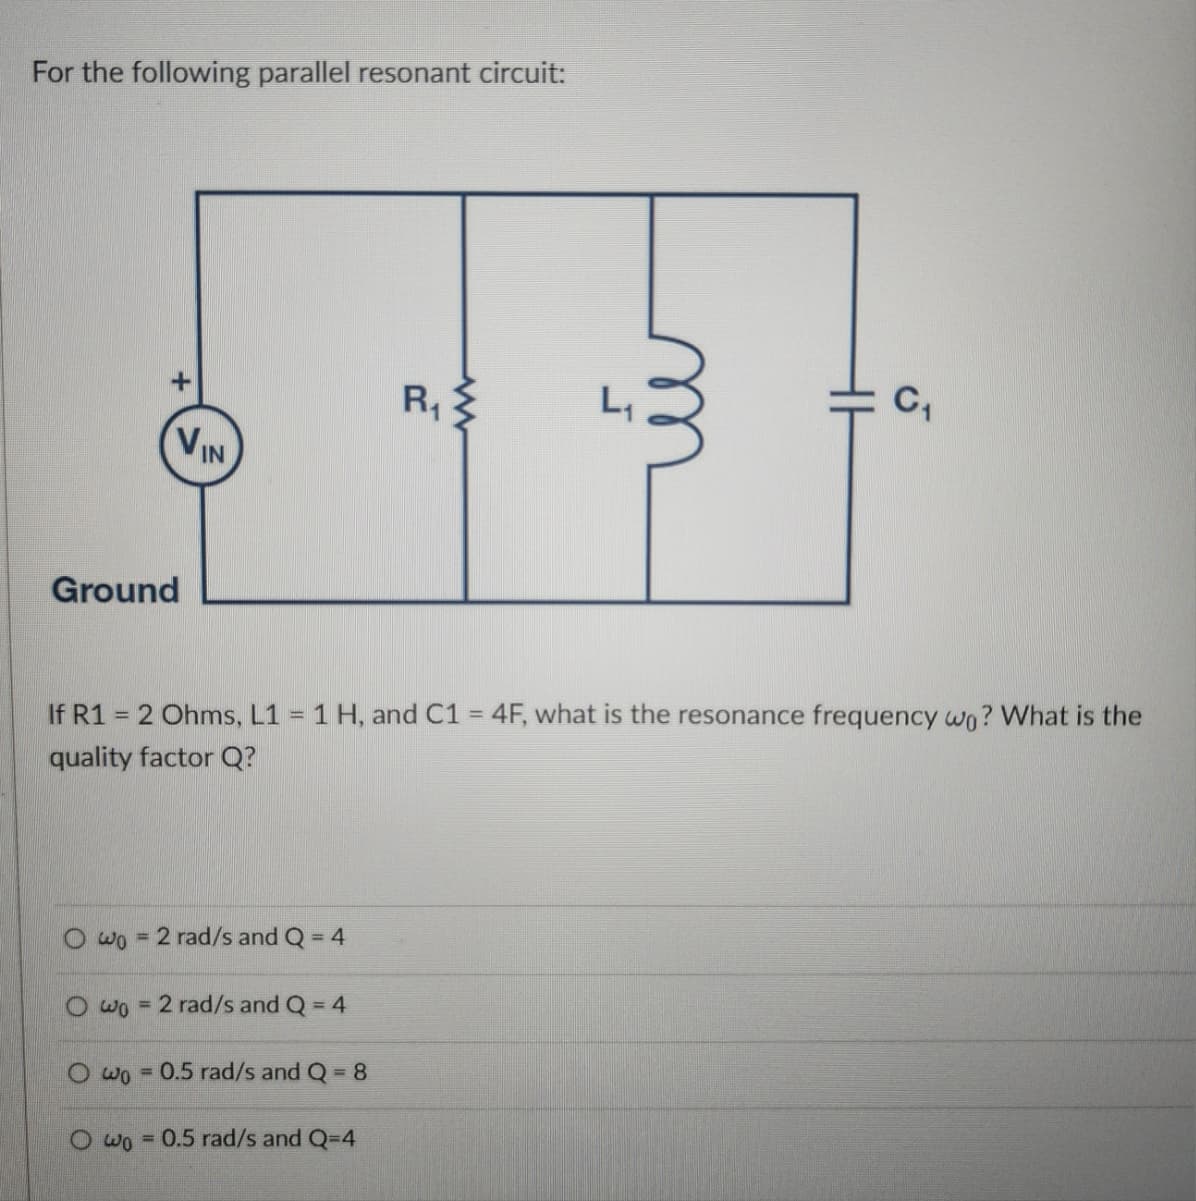 For the following parallel resonant circuit:
Ground
+
VIN
R₁
www
m
J
C₁
If R1 = 2 Ohms, L1 = 1 H, and C1 = 4F, what is the resonance frequency wo? What is the
quality factor Q?
Owo = 2 rad/s and Q = 4
Owo = 2 rad/s and Q = 4
wo =0.5 rad/s and Q = 8
Owo 0.5 rad/s and Q=4